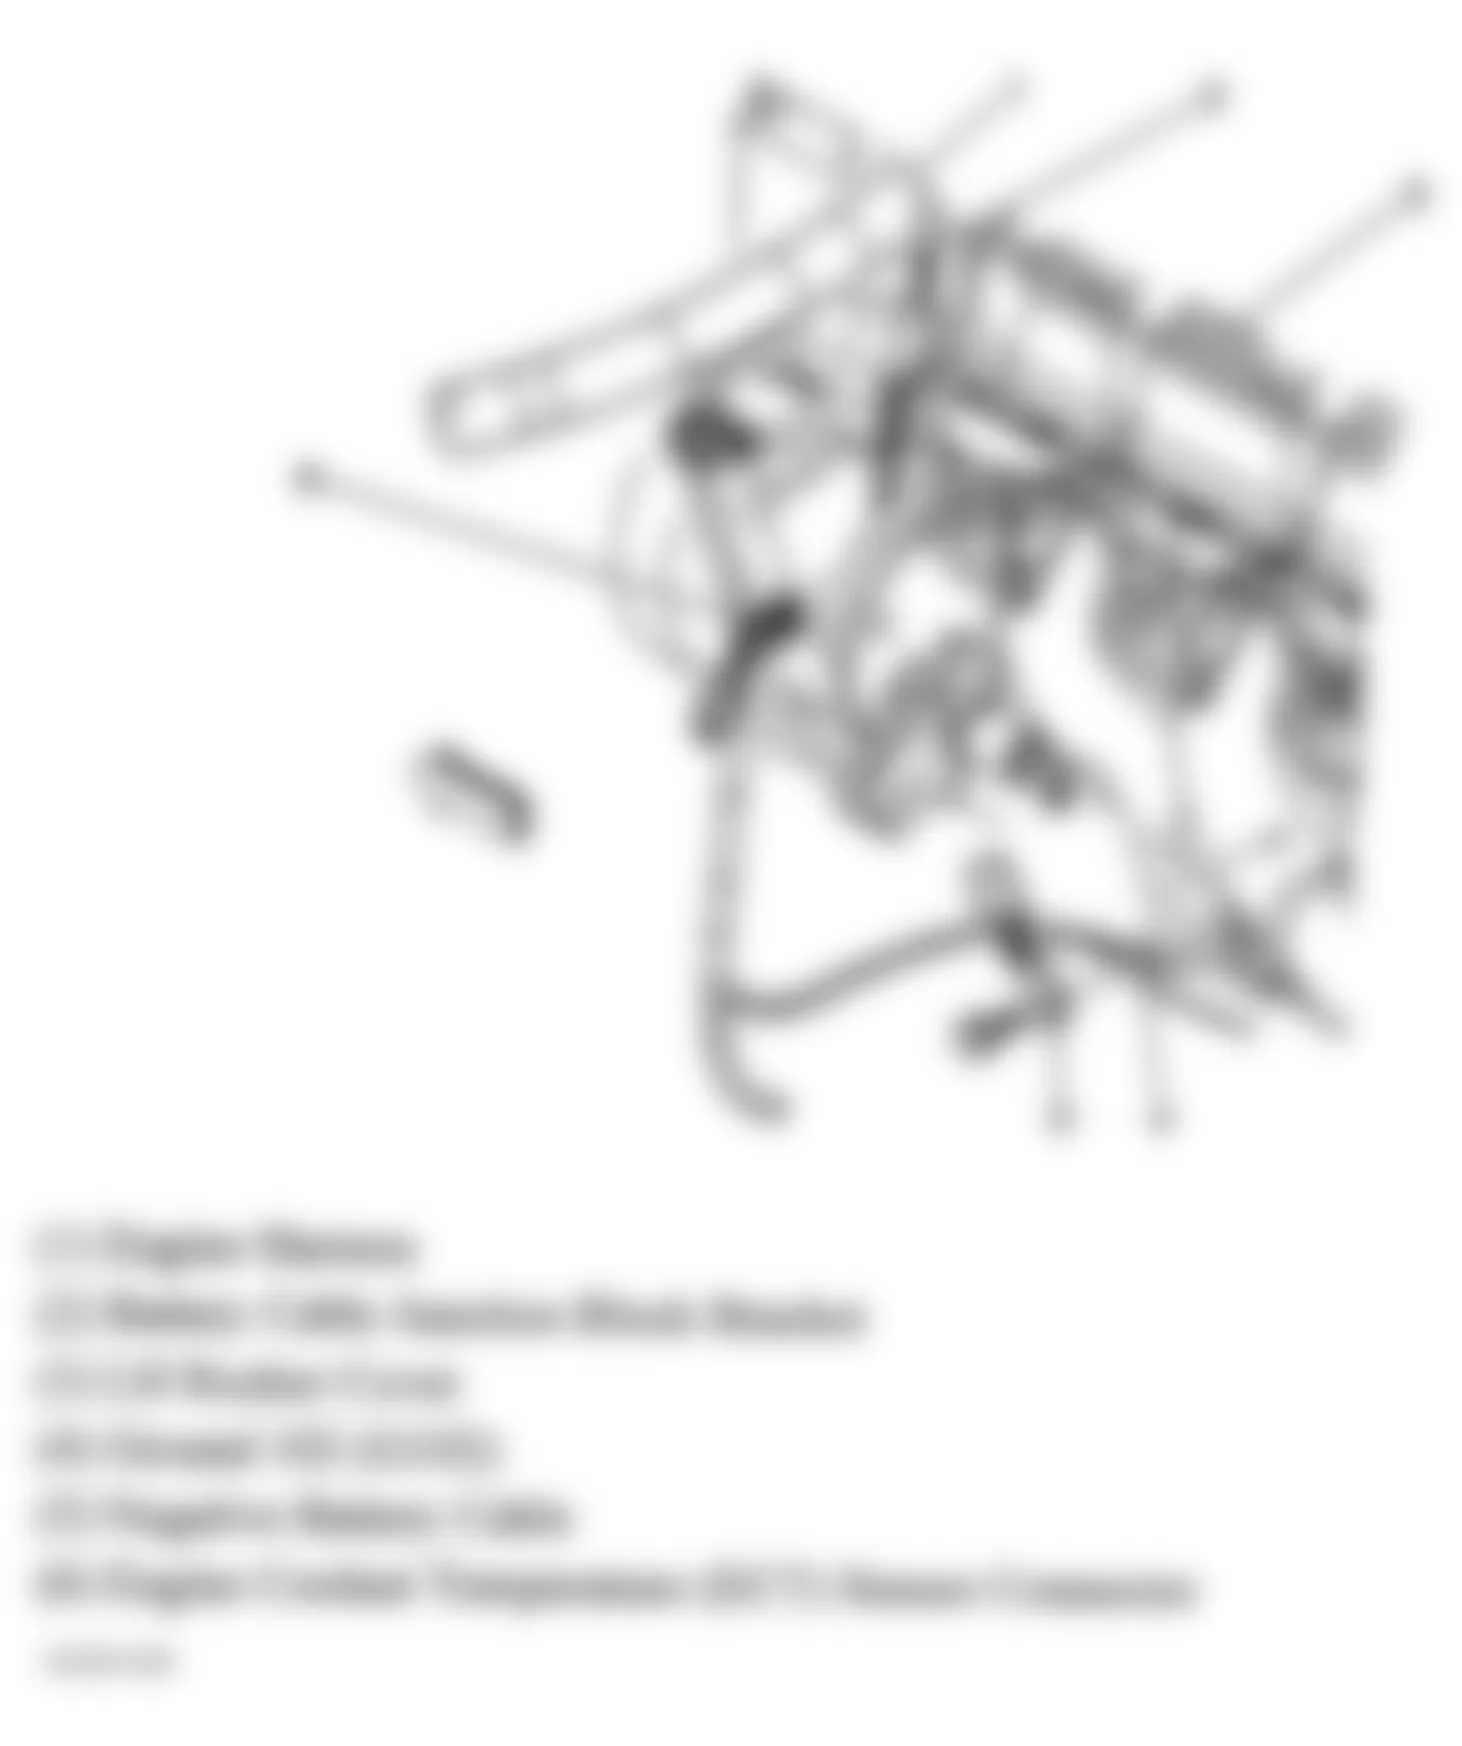 Chevrolet Avalanche 2500 2005 - Component Locations -  Lower Left Rear Of Engine (4.8L, 5.3L & 6.0L)